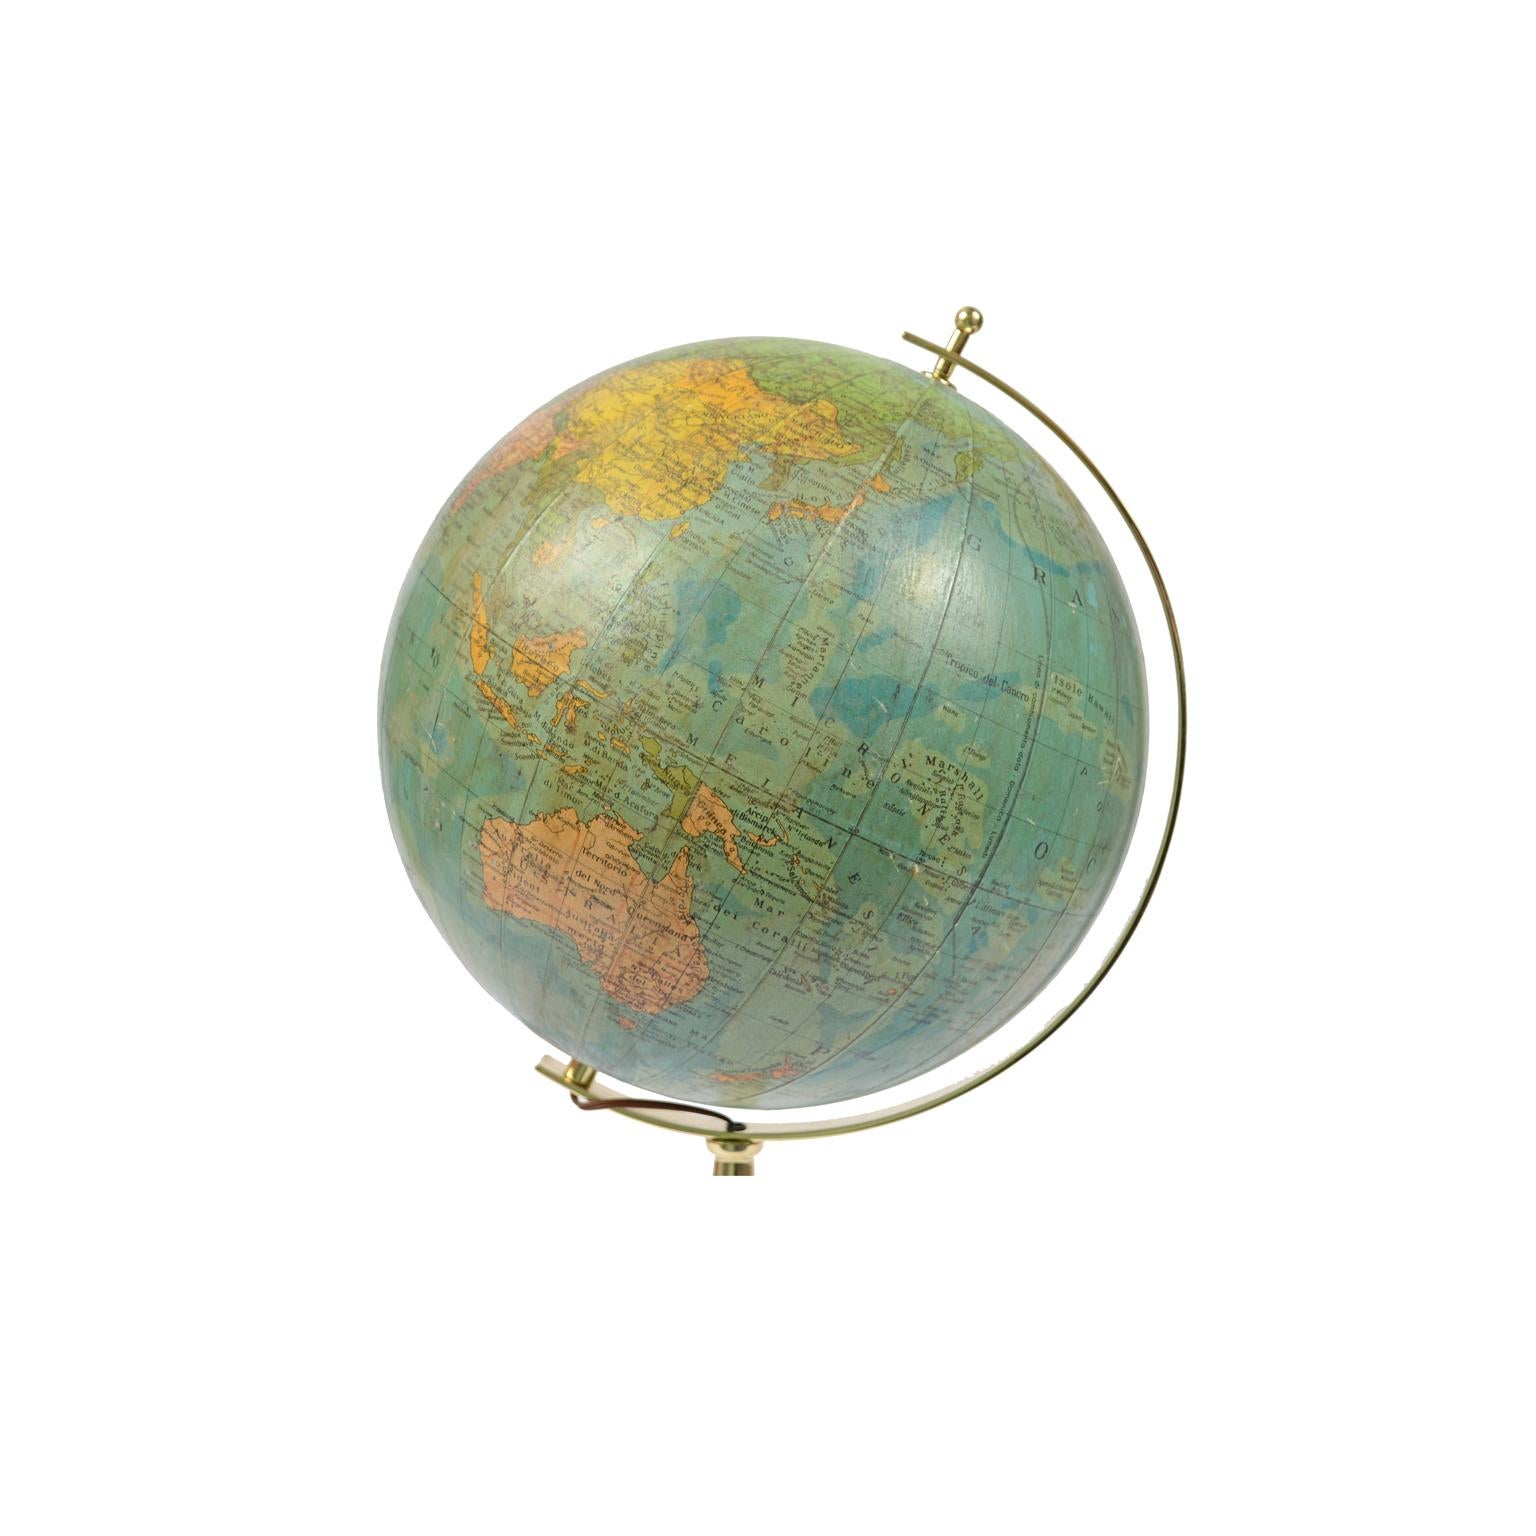 Terrestrial globe illuminated from the inside (EU plug); on the cartouche we read: Globo terrestre Geografico scala 1:50.000.000 Fisico – Politica Torino, made in the 1950s. Sphere of transparent celluloid and covered with paper and base of turned